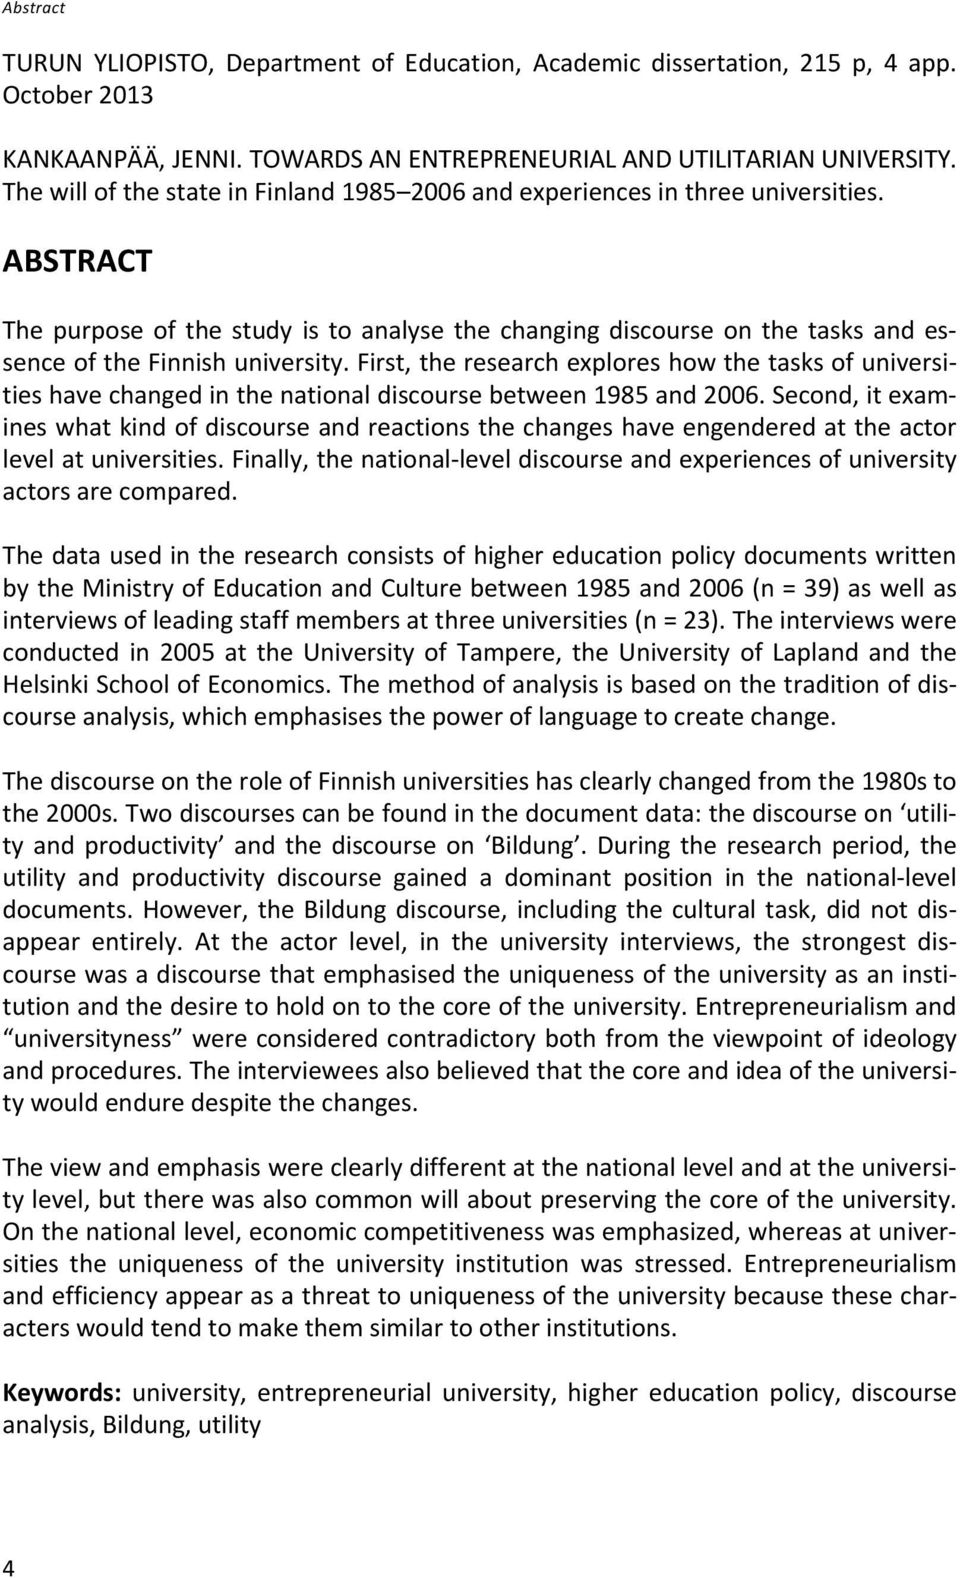 ABSTRACT The purpose of the study is to analyse the changing discourse on the tasks and essence of the Finnish university.